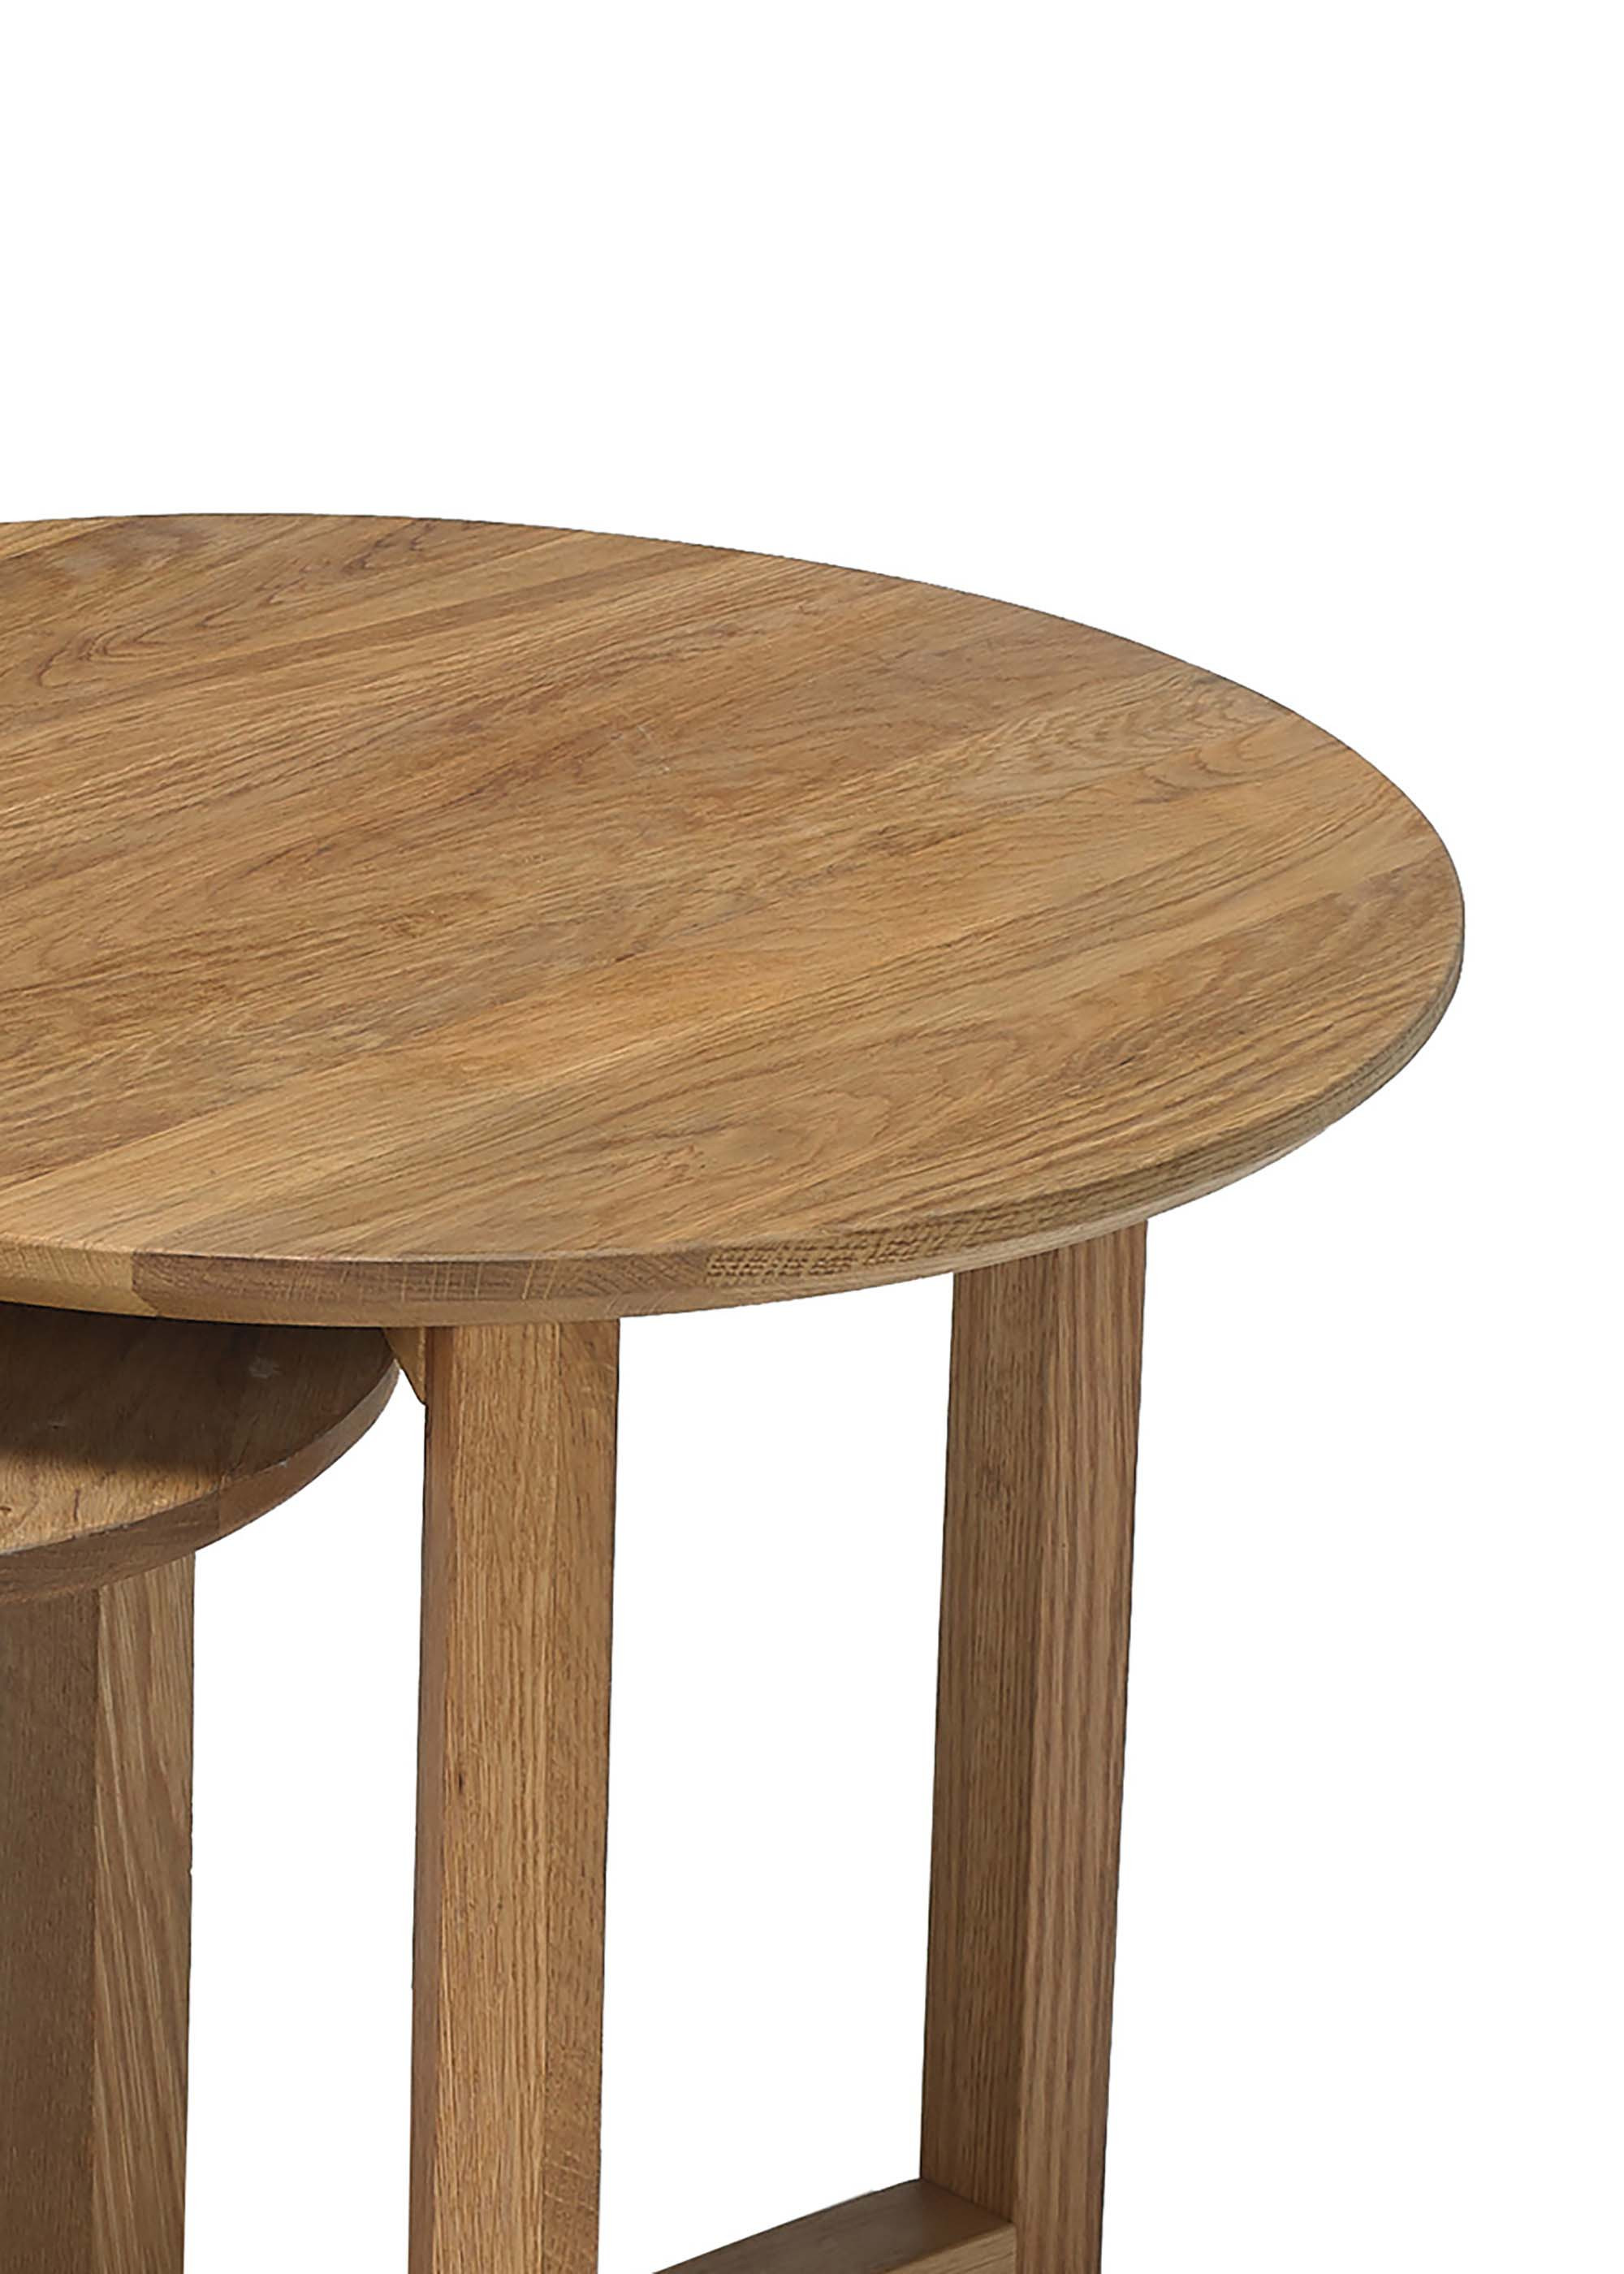 Stow Nest Of Tables Oak